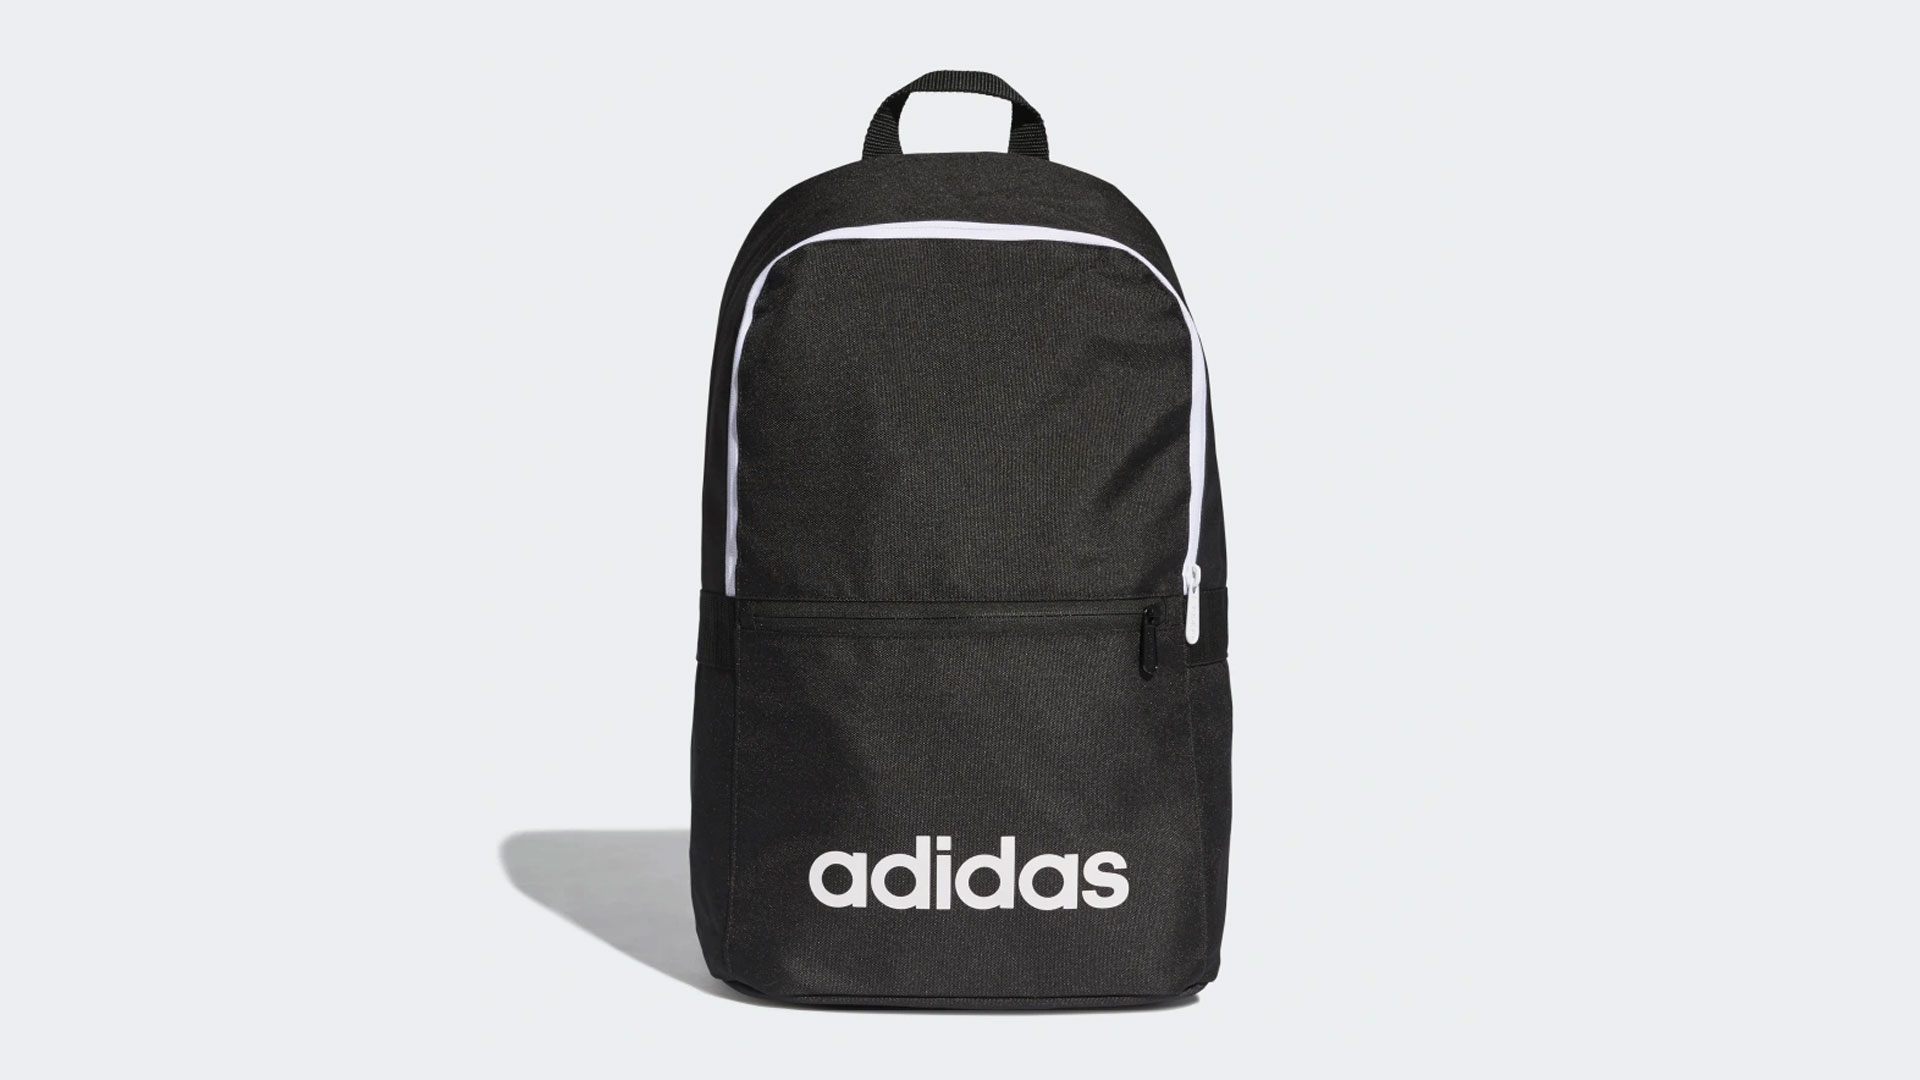 Best Adidas Backpacks: 5 Great Options to Consider 2